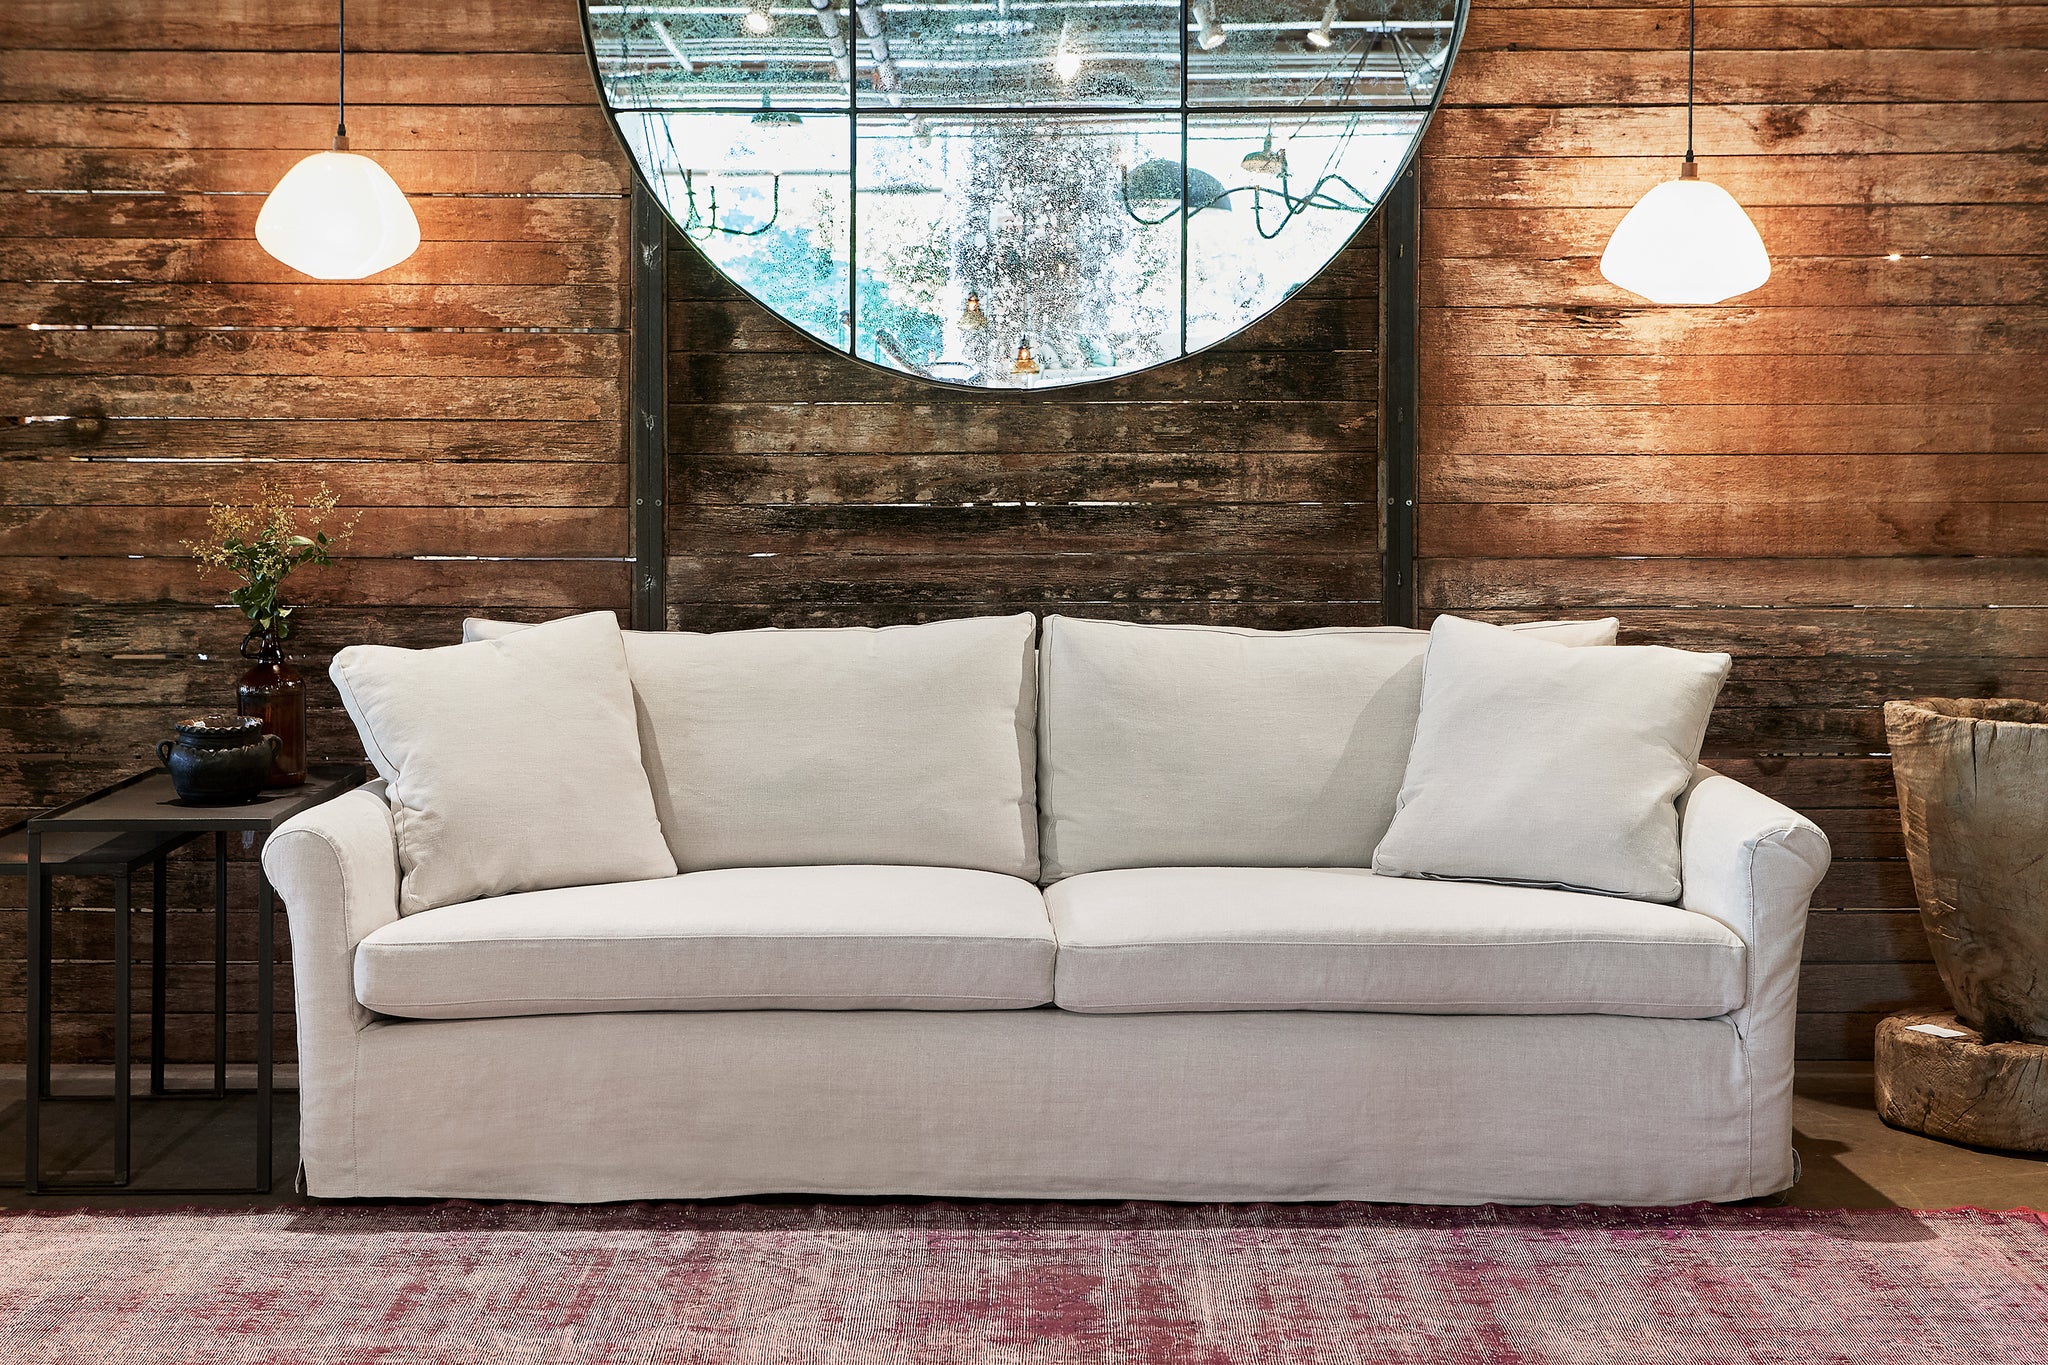  Light colored slipcovered sofa in front of a dark wood wall with 2 white lighting pendants and a large round mirror. Photographed in Noah Bone. 